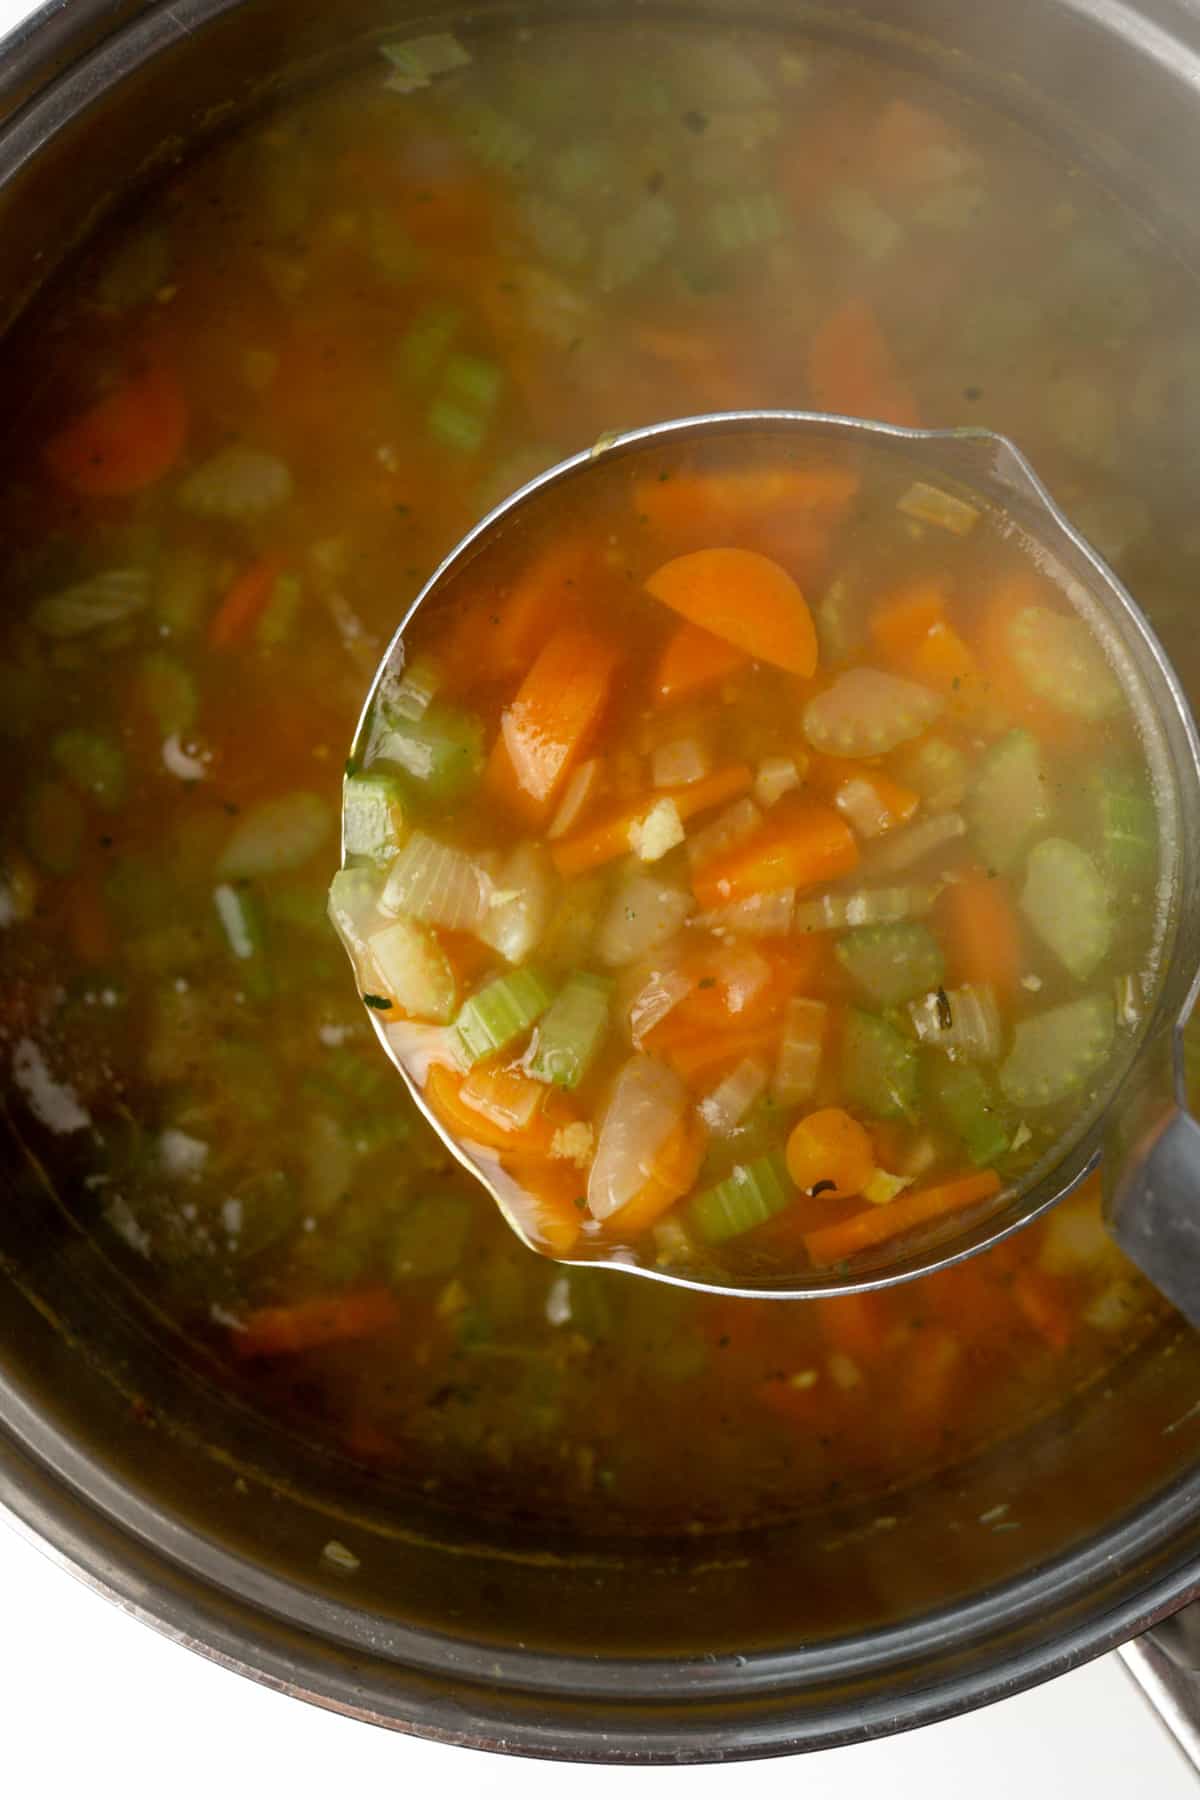 A ladle of broth with pieces of carrots and celery.